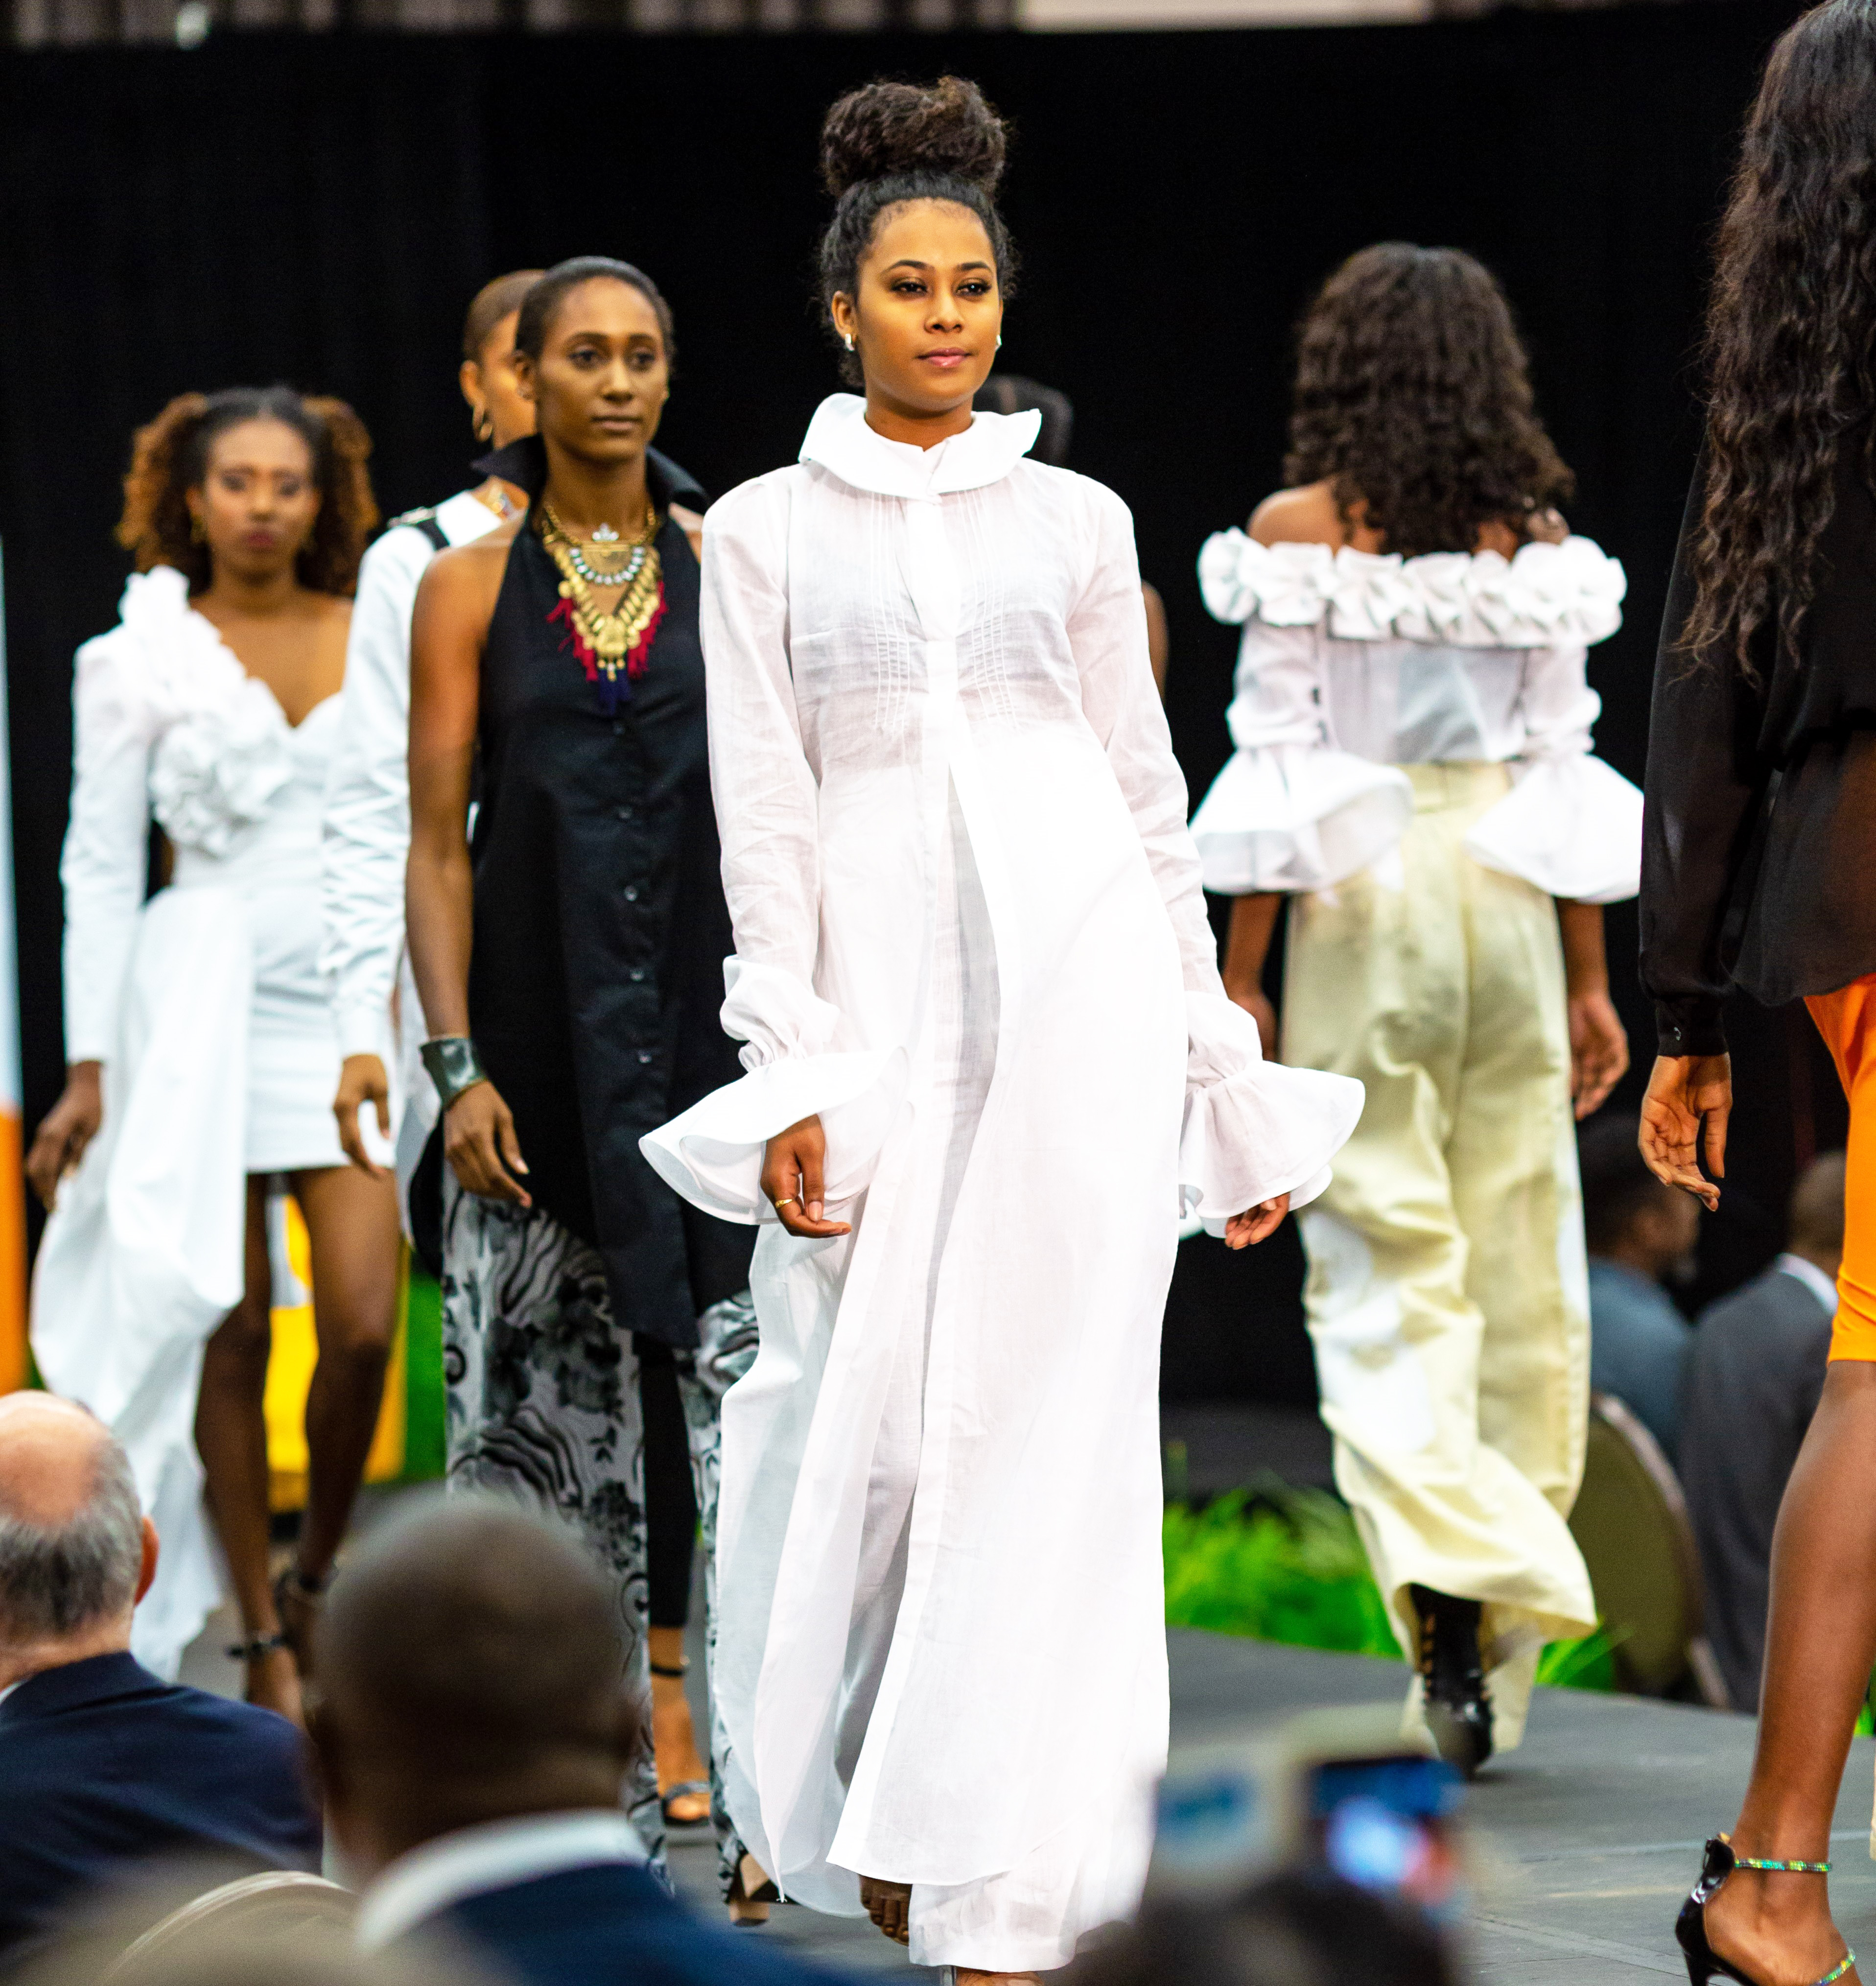 Models in linen clothing on a catwalk.